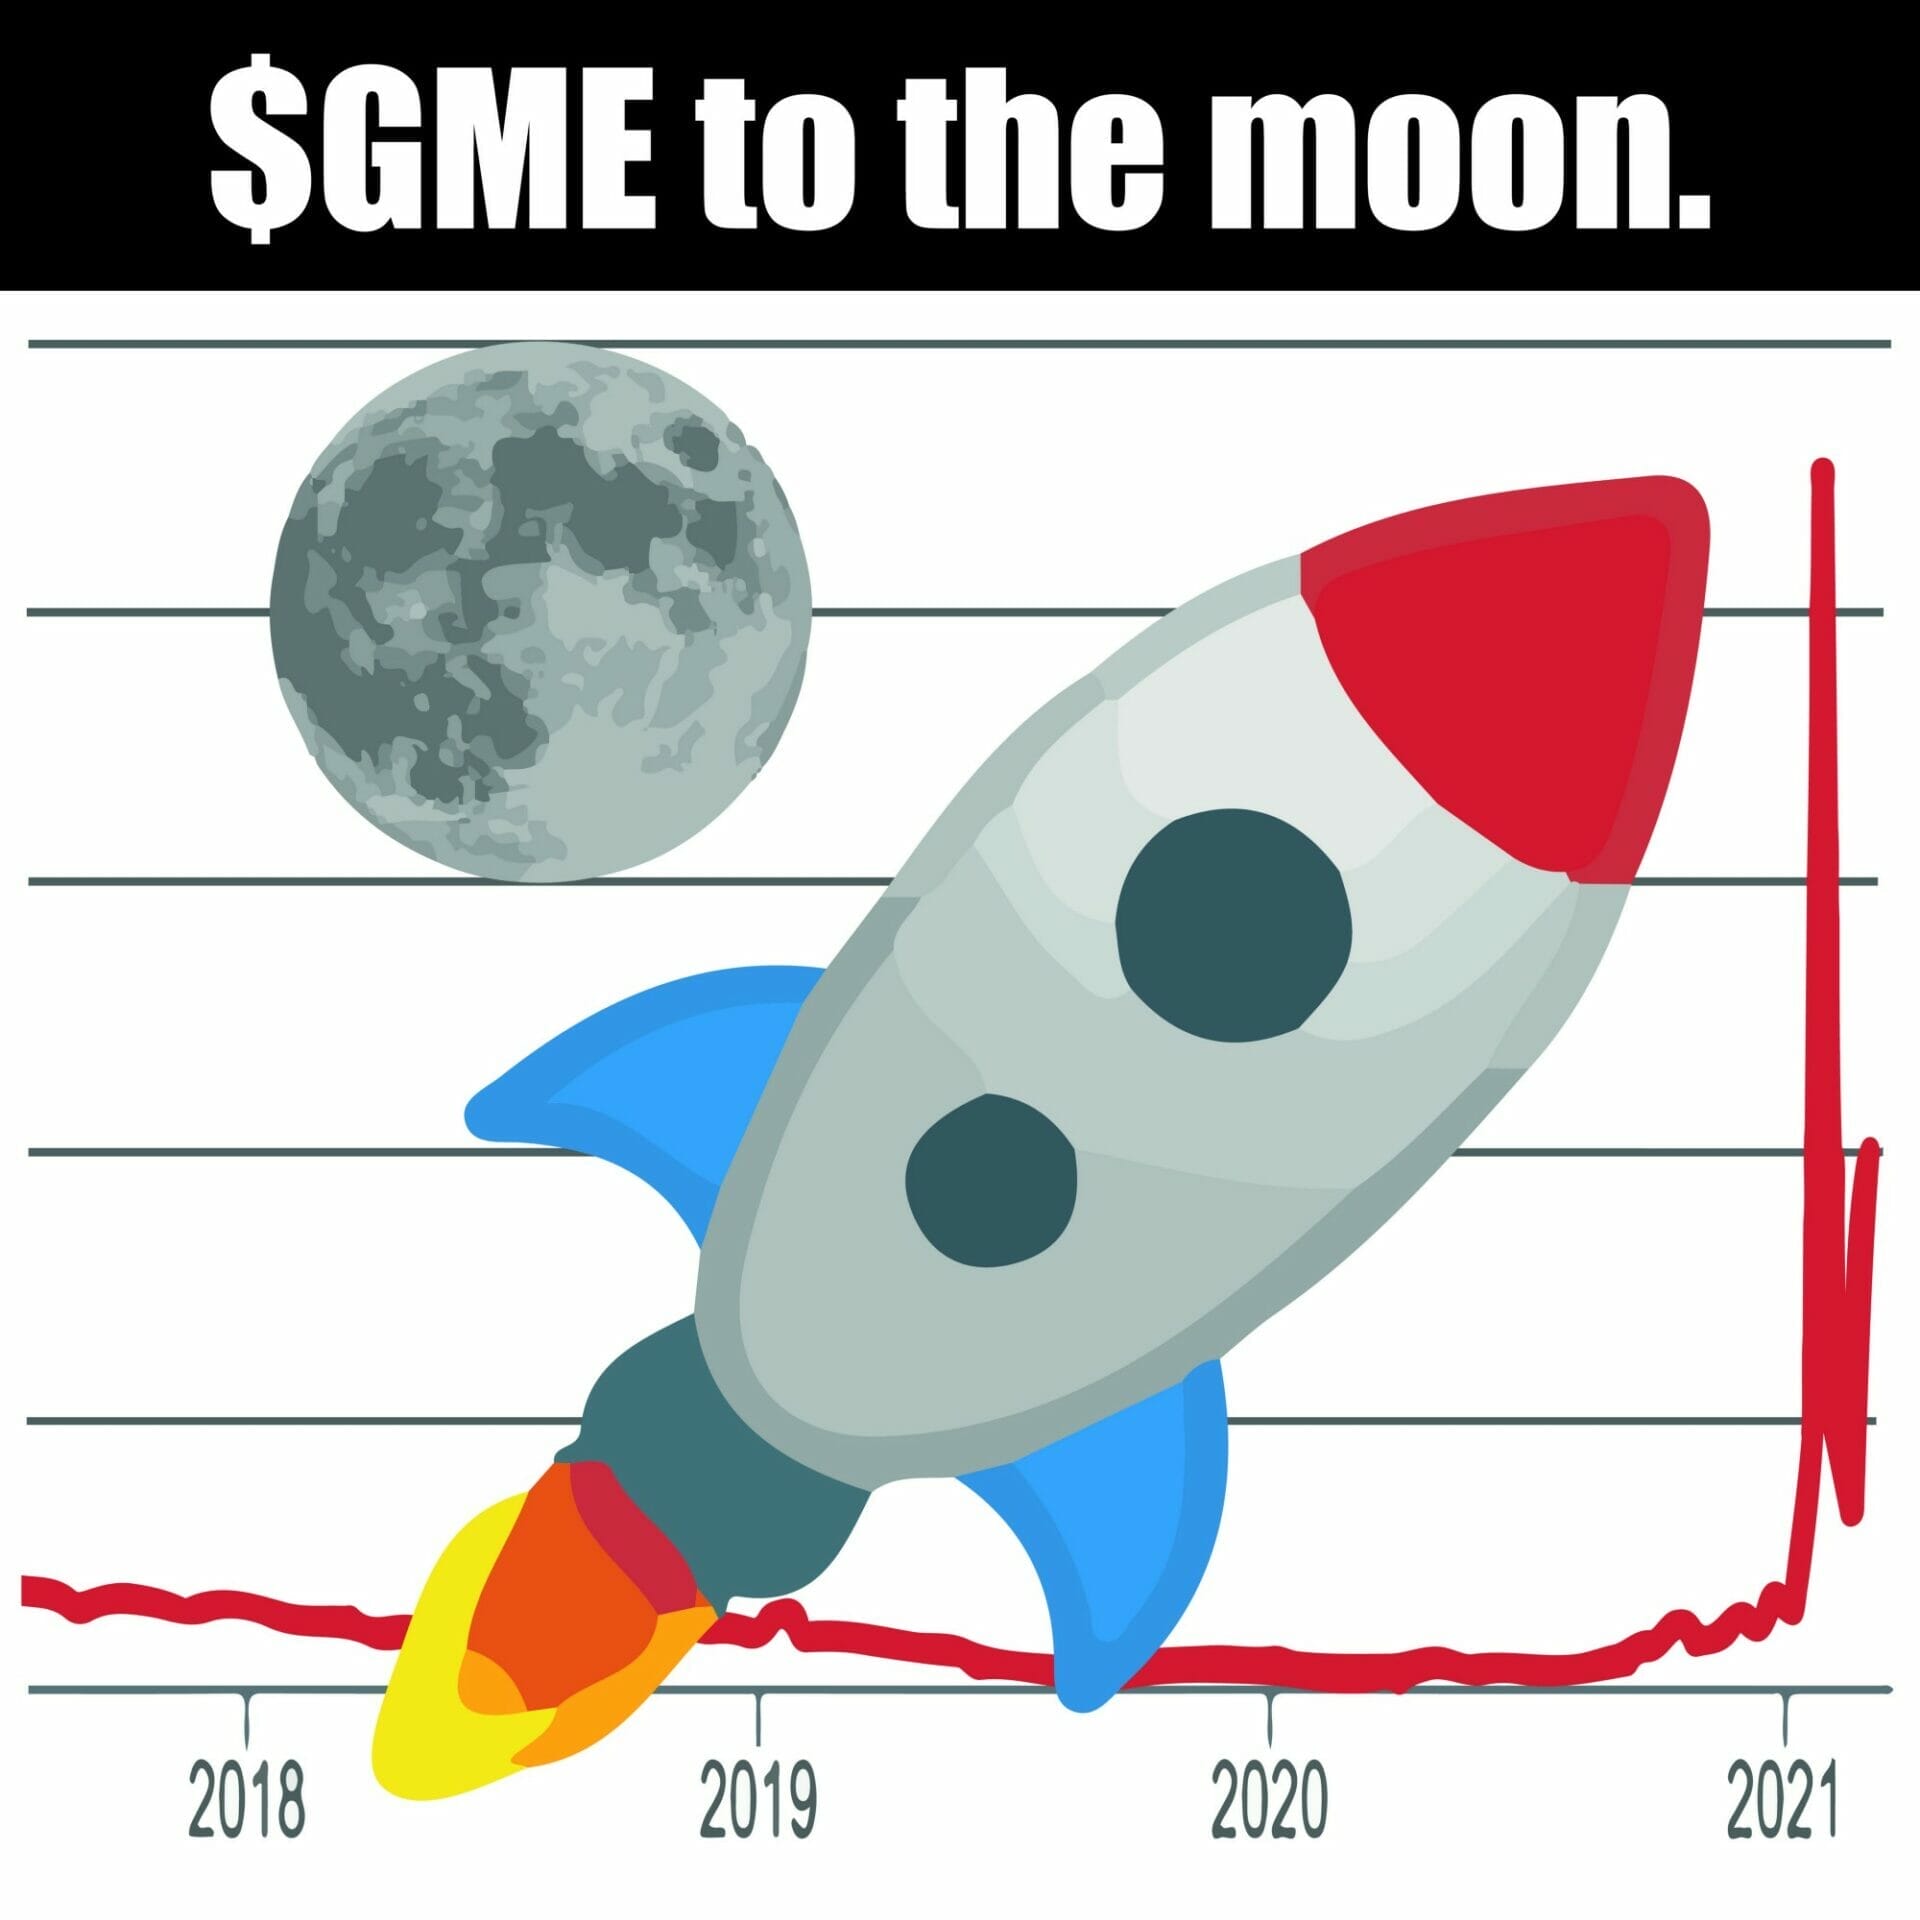 Ready to launch the Gamestop rocket. “GME to the moon” is a popular comment in the 